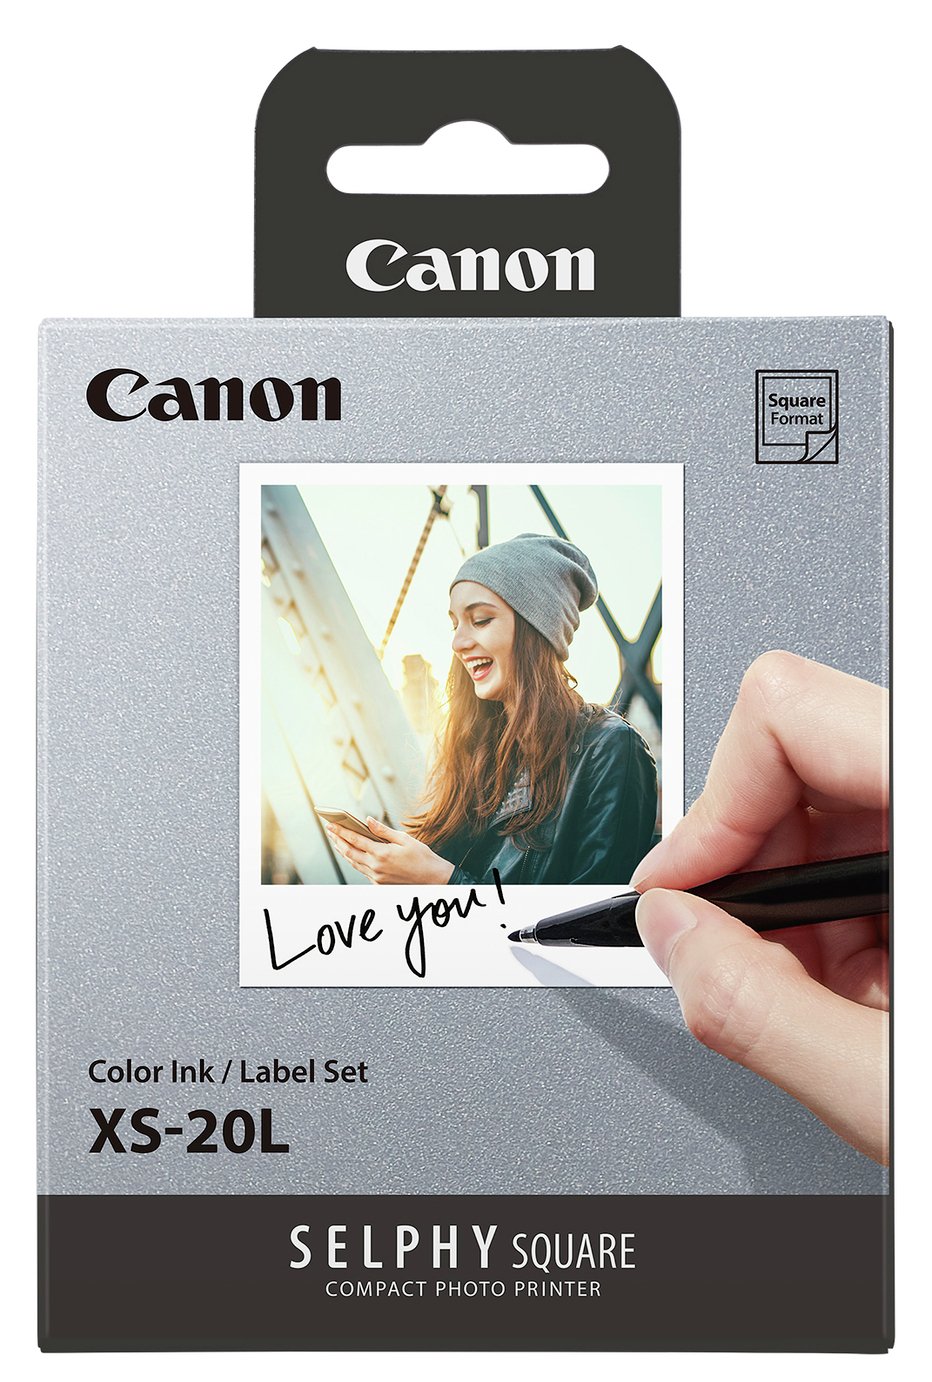 Canon 2.7 x 2.7in Photo Paper Review